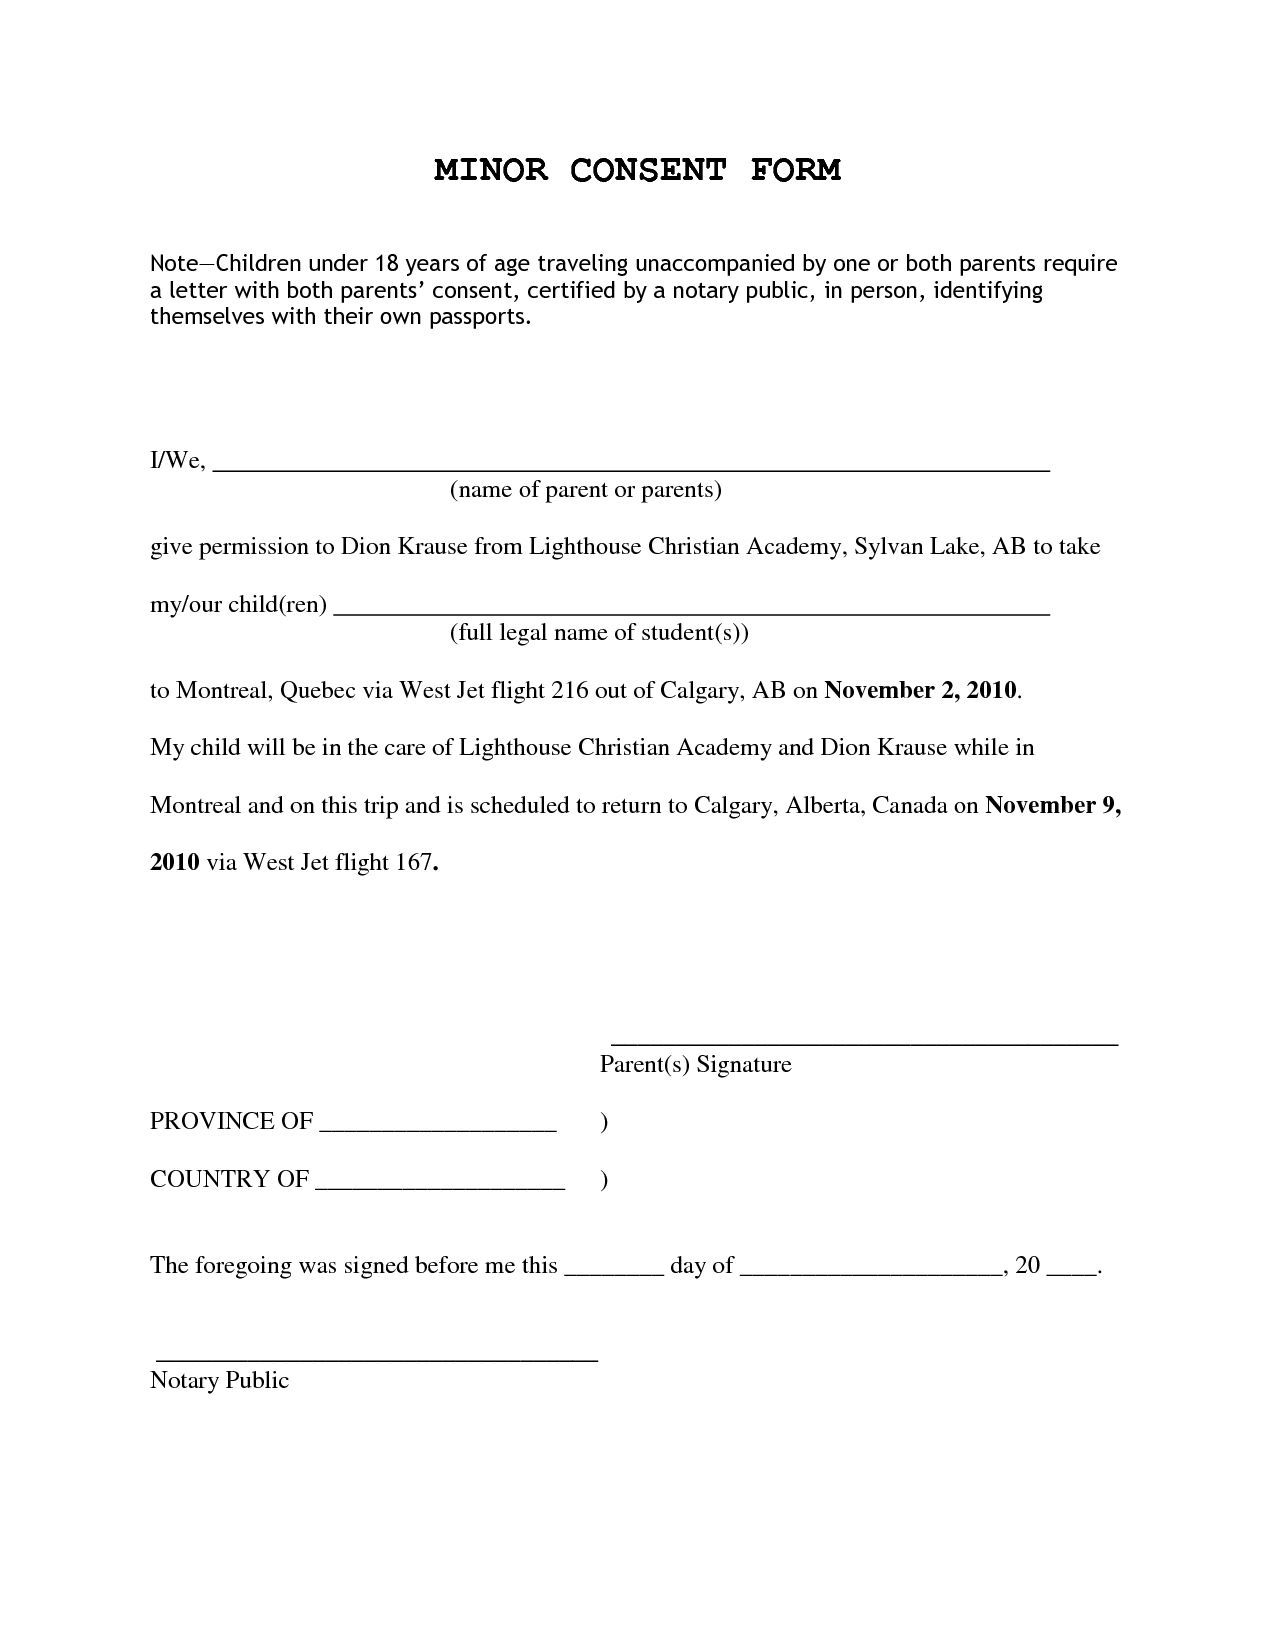 Free Travel Consent Form For Minor Traveling With One Parent 